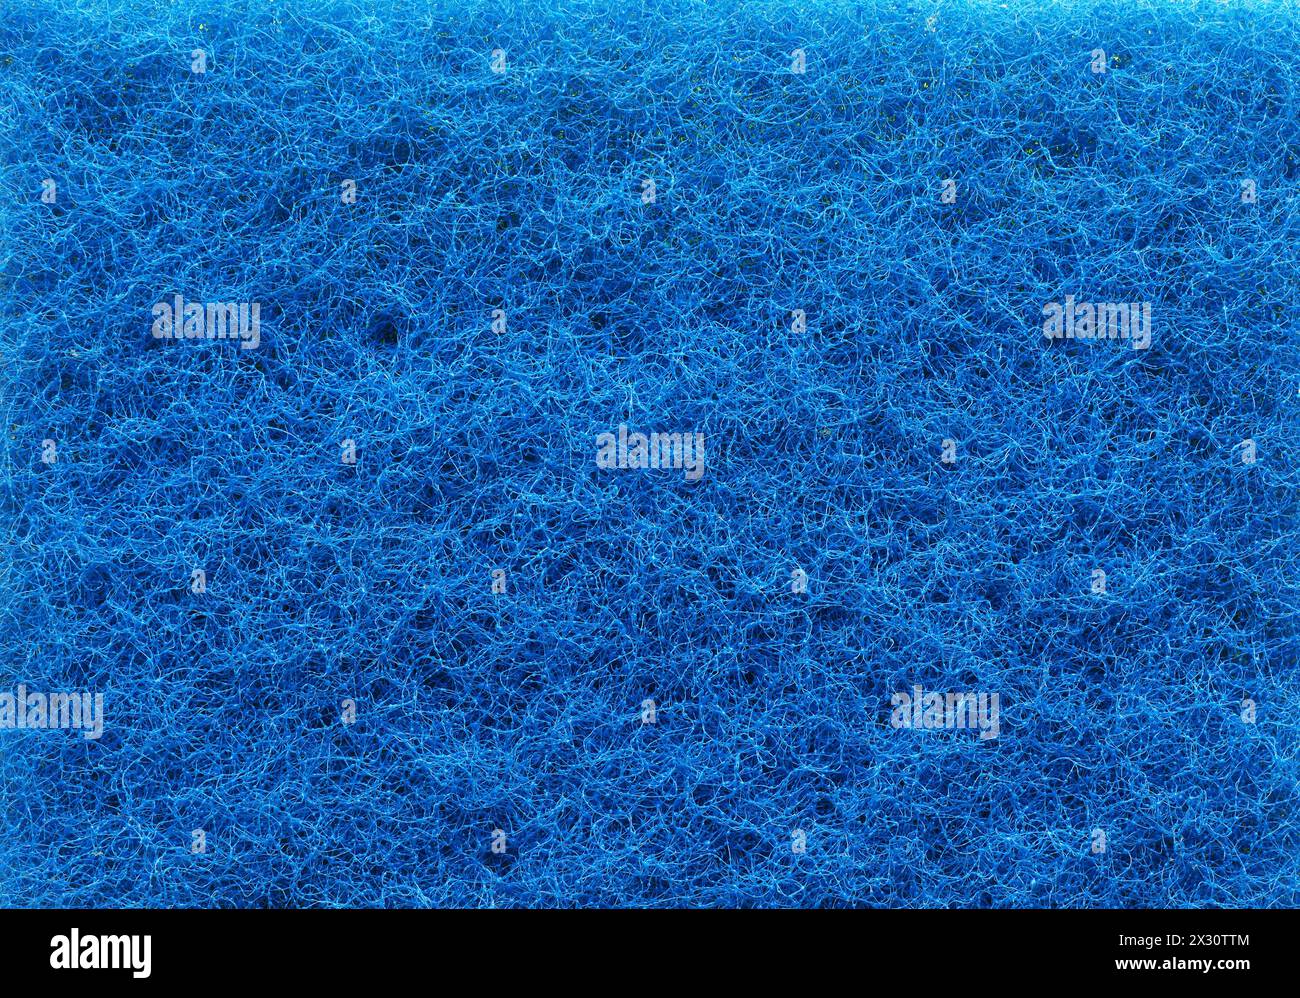 Texture of a blue plastic fiber sponge, environmentally harmful products concept  RECORD DATE NOT STATED Stock Photo